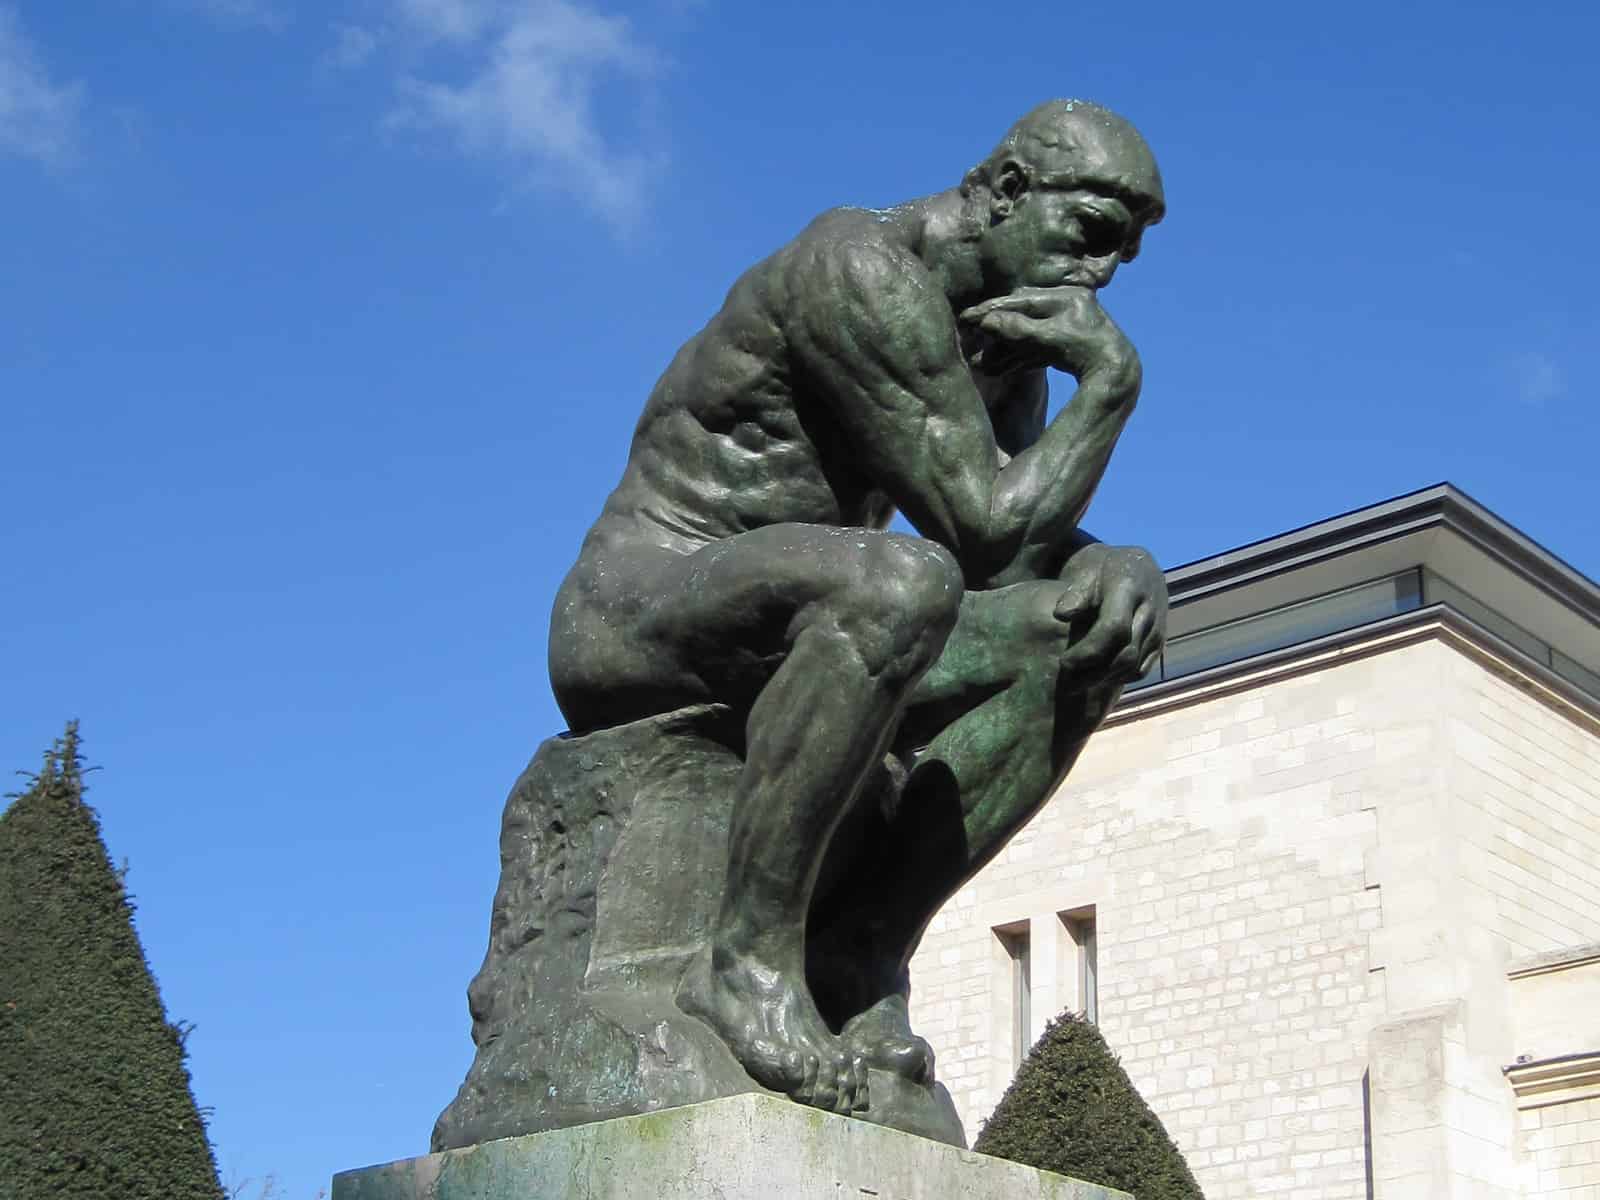 Stroll 13 The Thinker at Musee Rodin